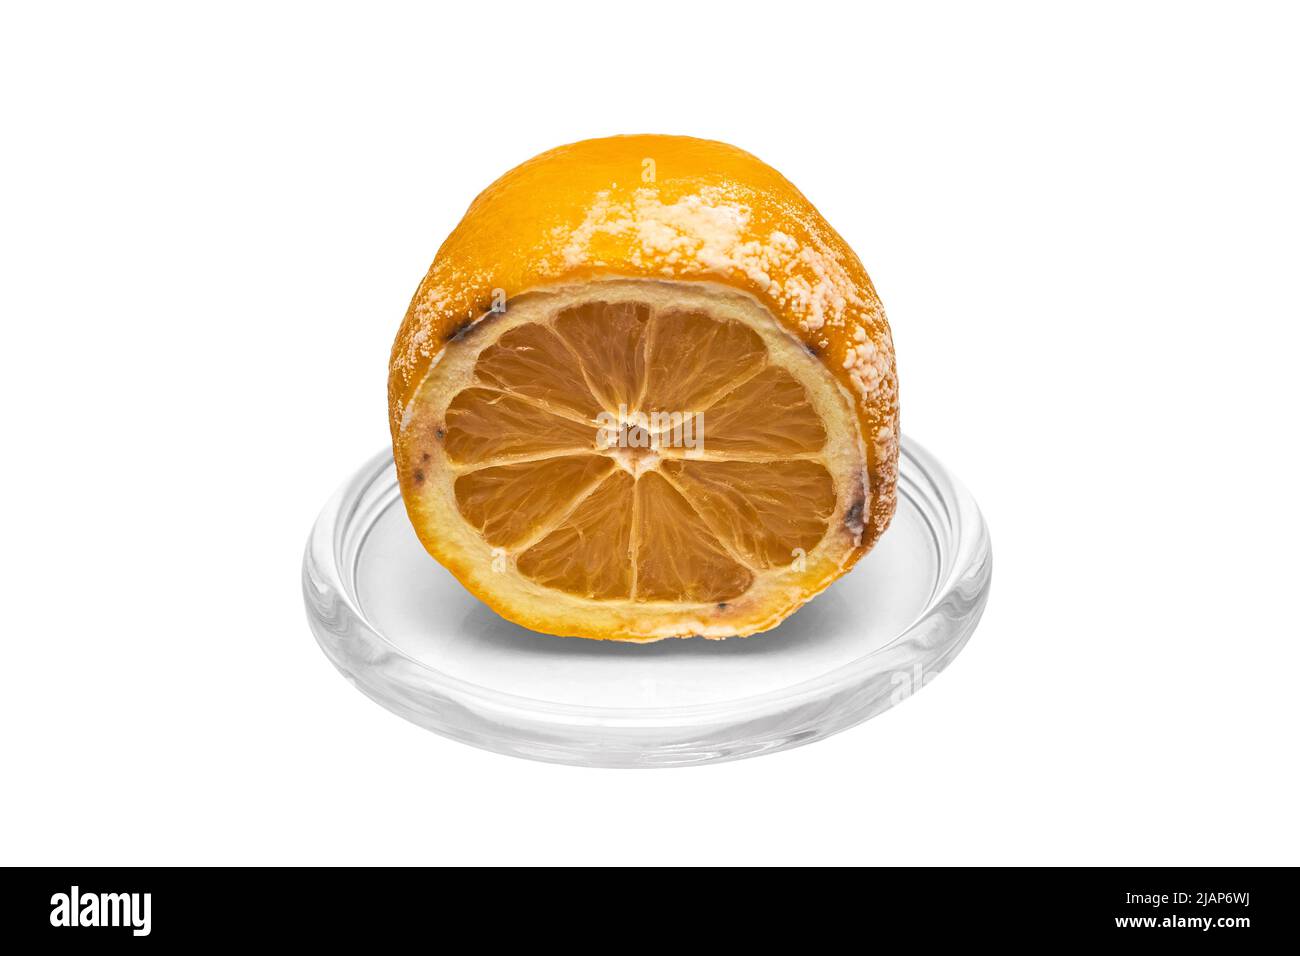 Rotten lemon with mold on a glass plate. Spoiled food. Isolated Stock Photo